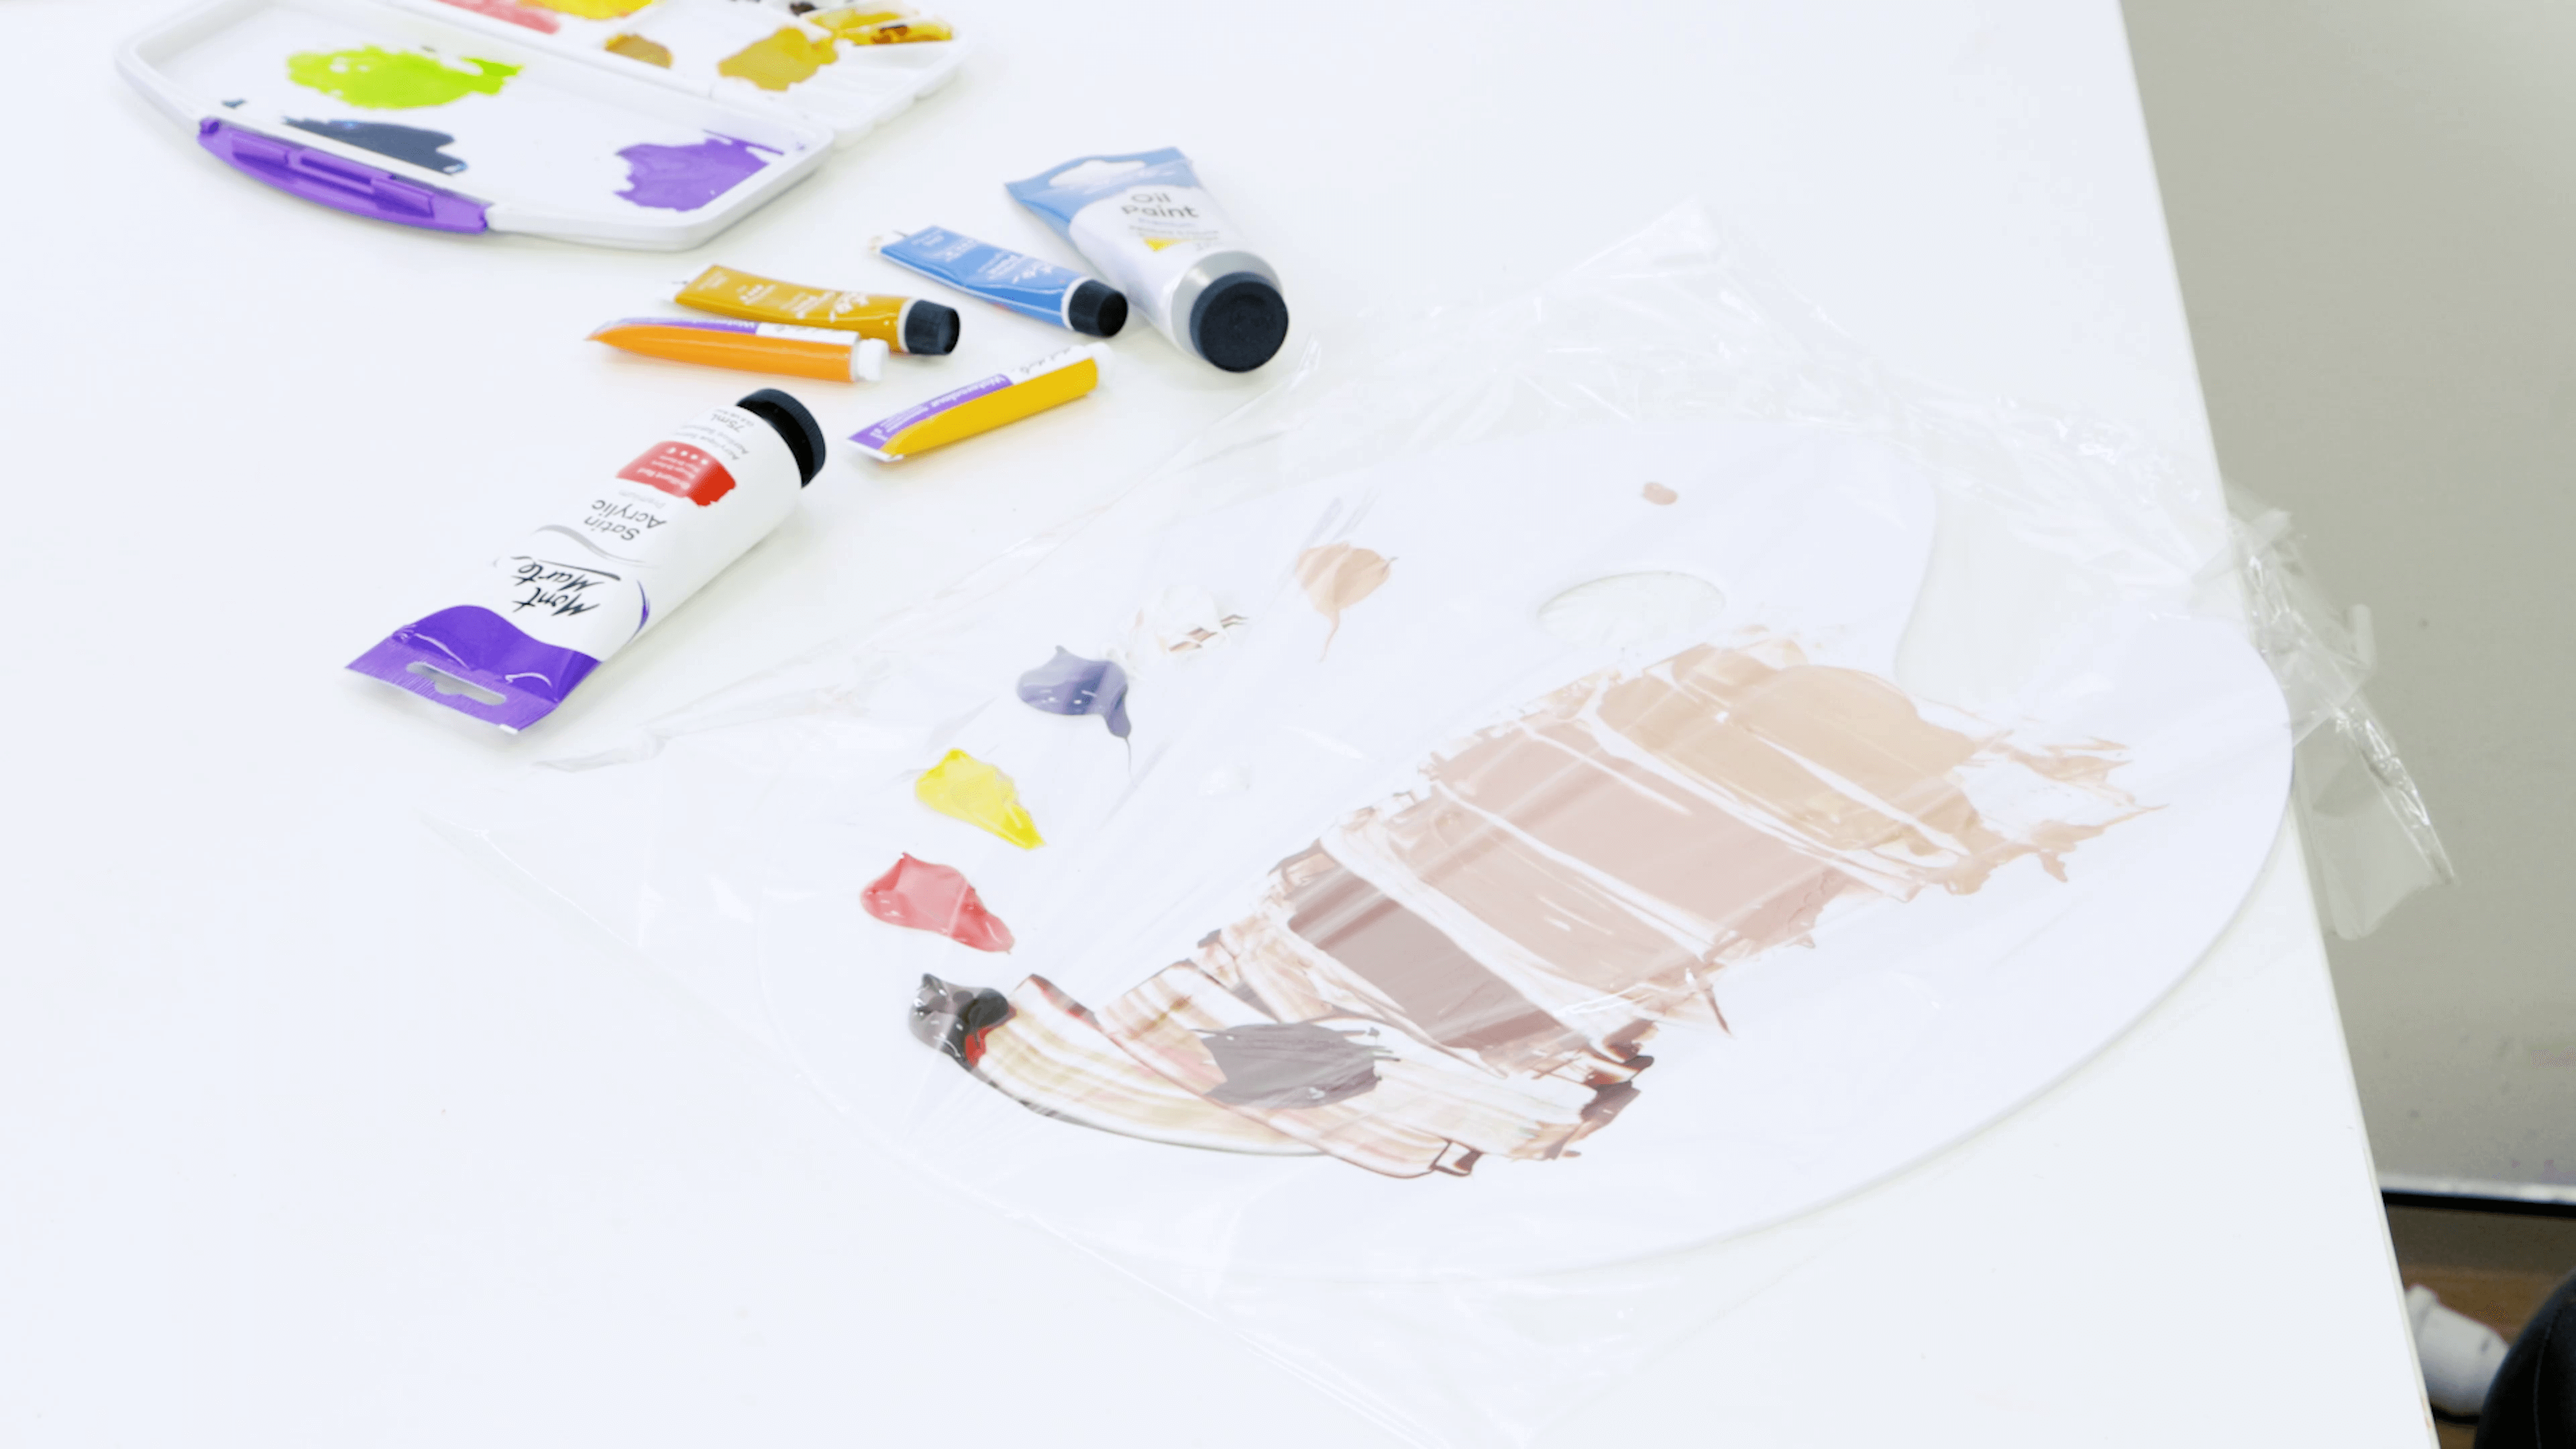 10 tips for how to dispose of acrylic paint thoughtfully – Mont